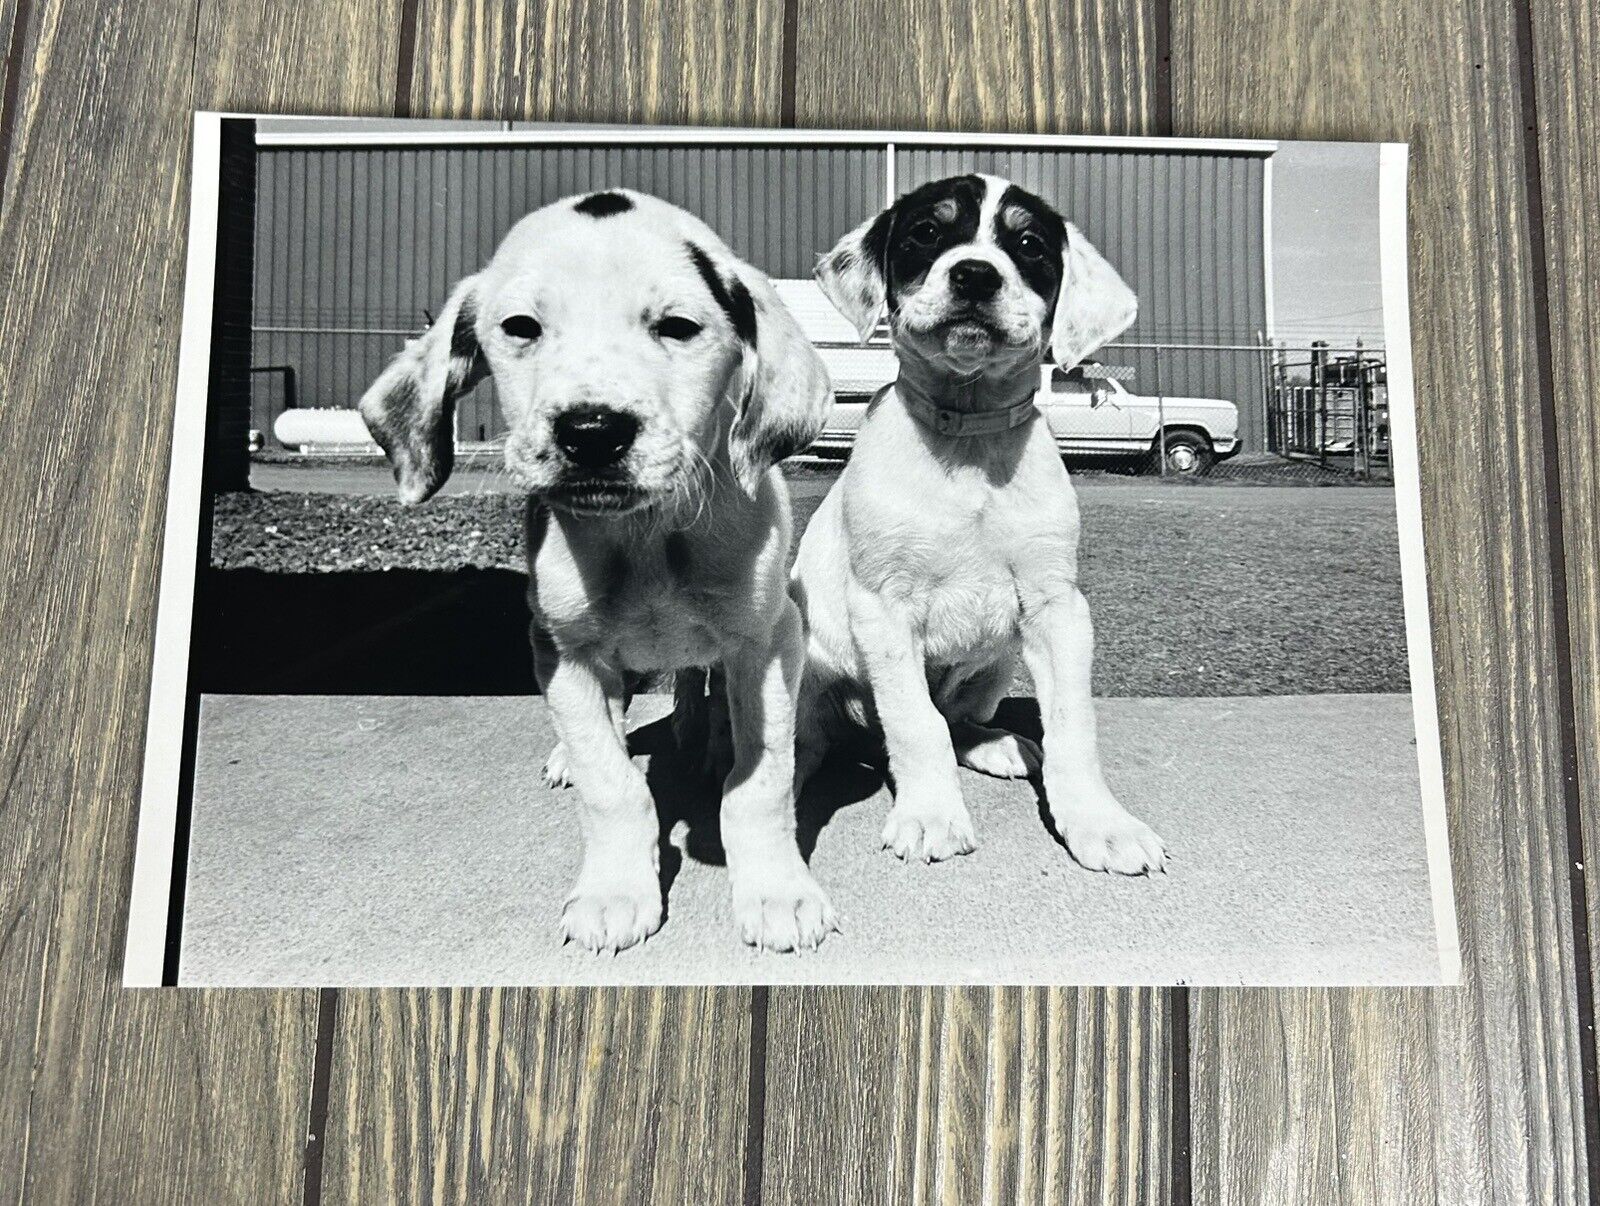 Vintage February 1985 2 Dog Puppies Outside Photograph 10” x 7”